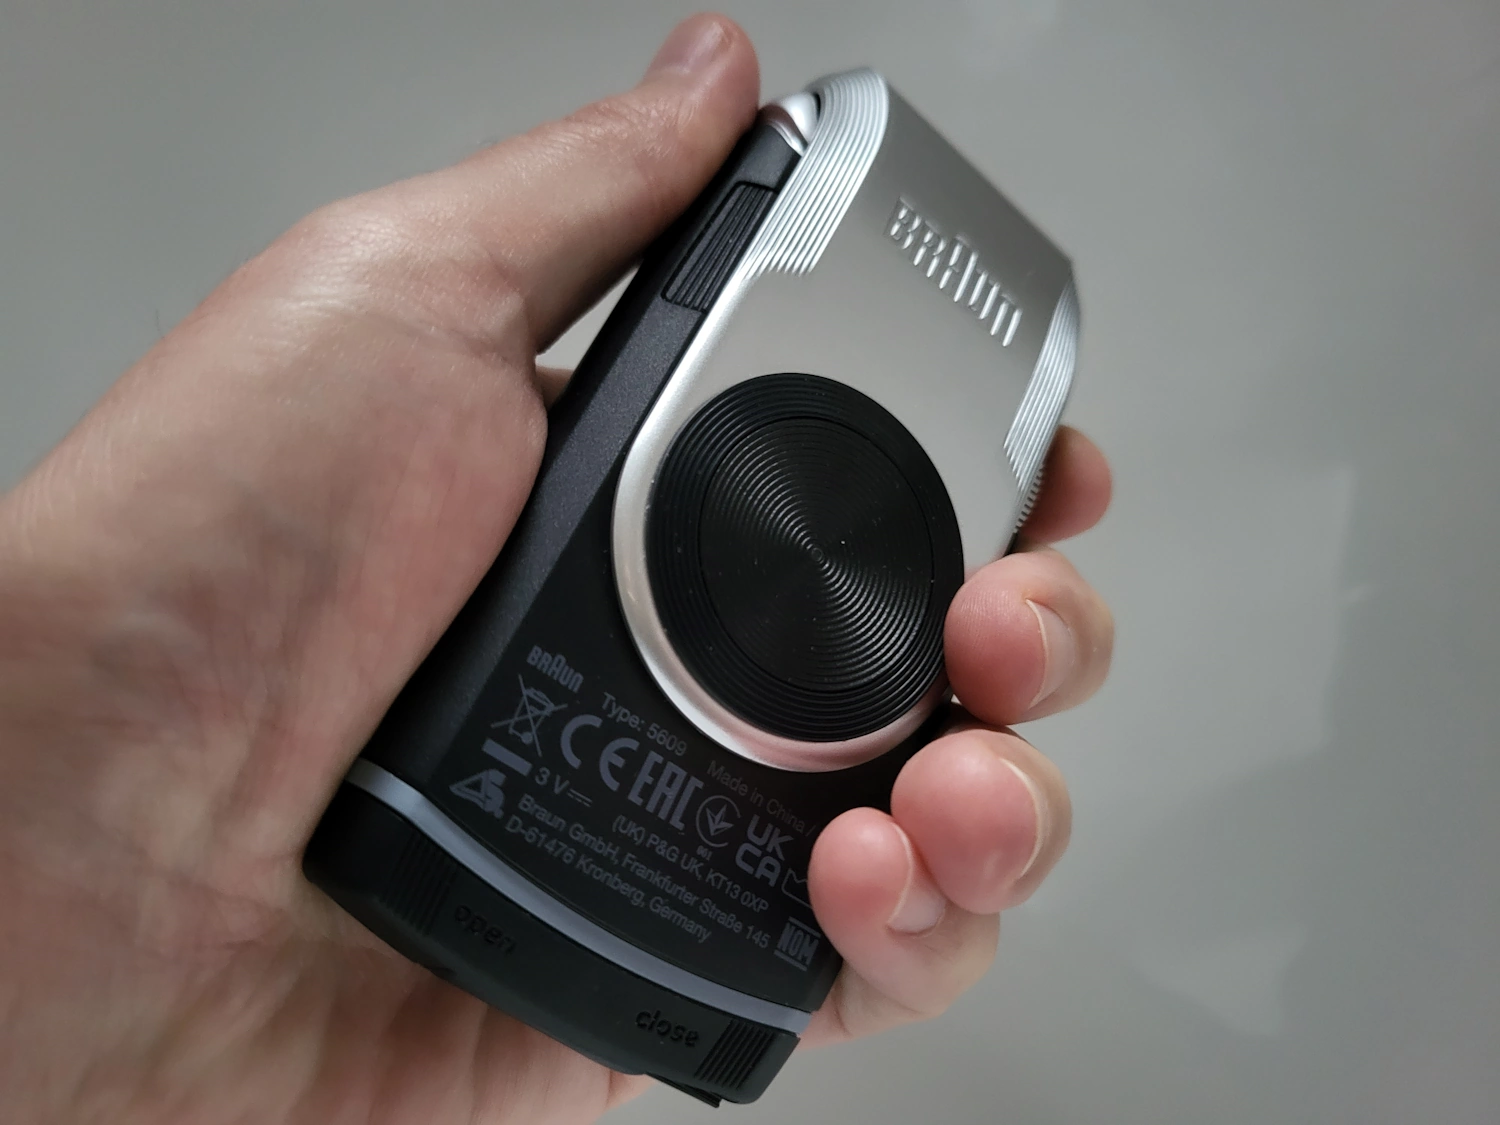 holding the Braun MobileShave M-90 shaver to display how it fits in the hand